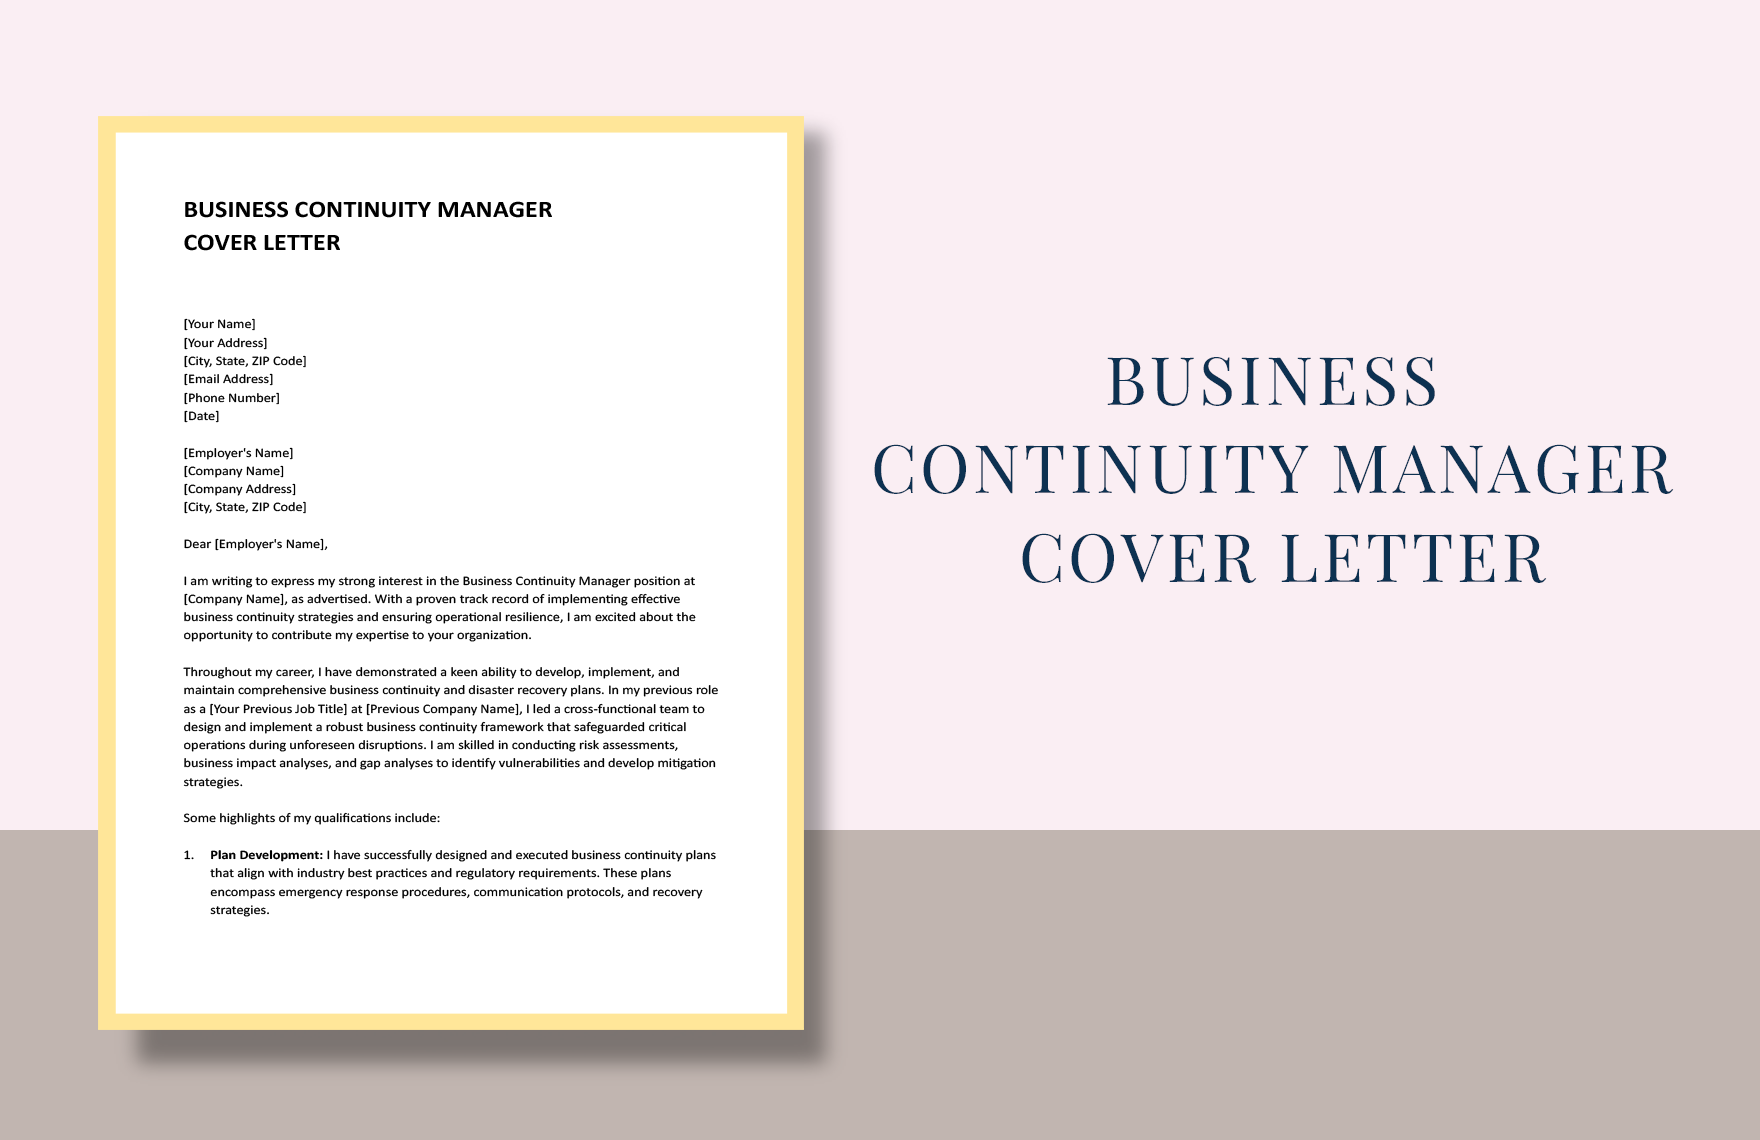 Business Continuity Manager Cover Letter